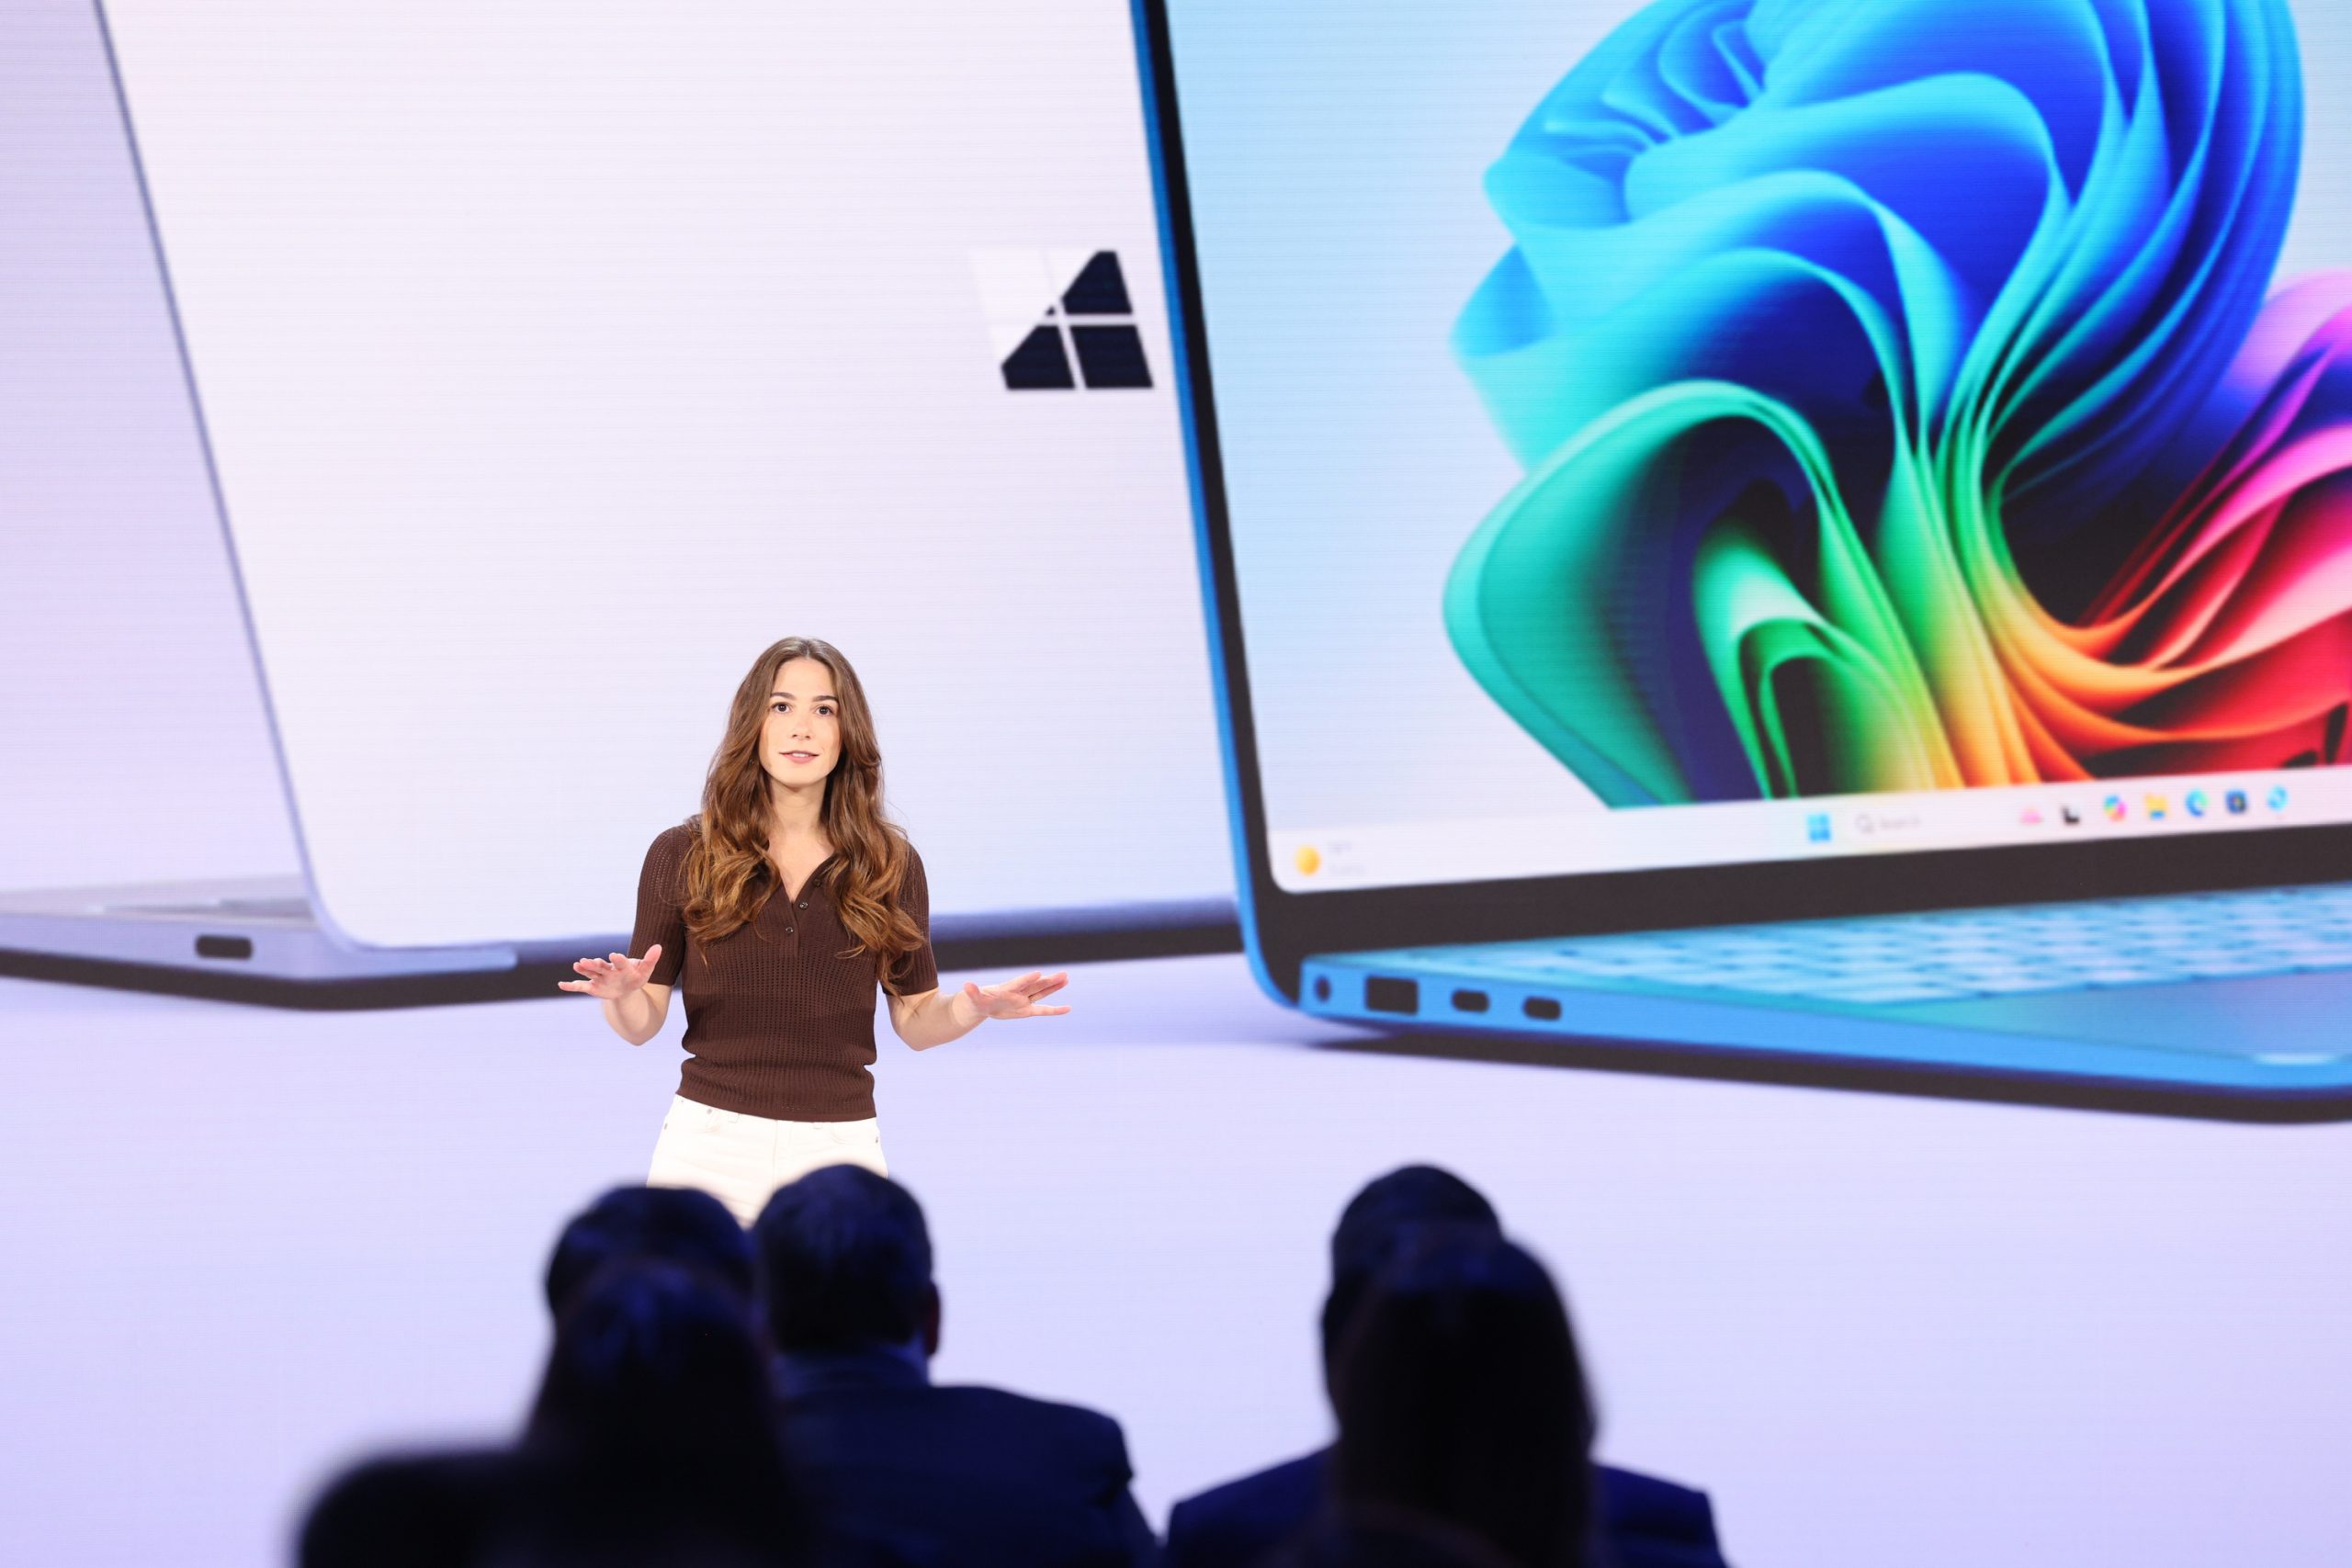 A woman standing on stage in front of an audience, with an image of a laptop on the screen behind her